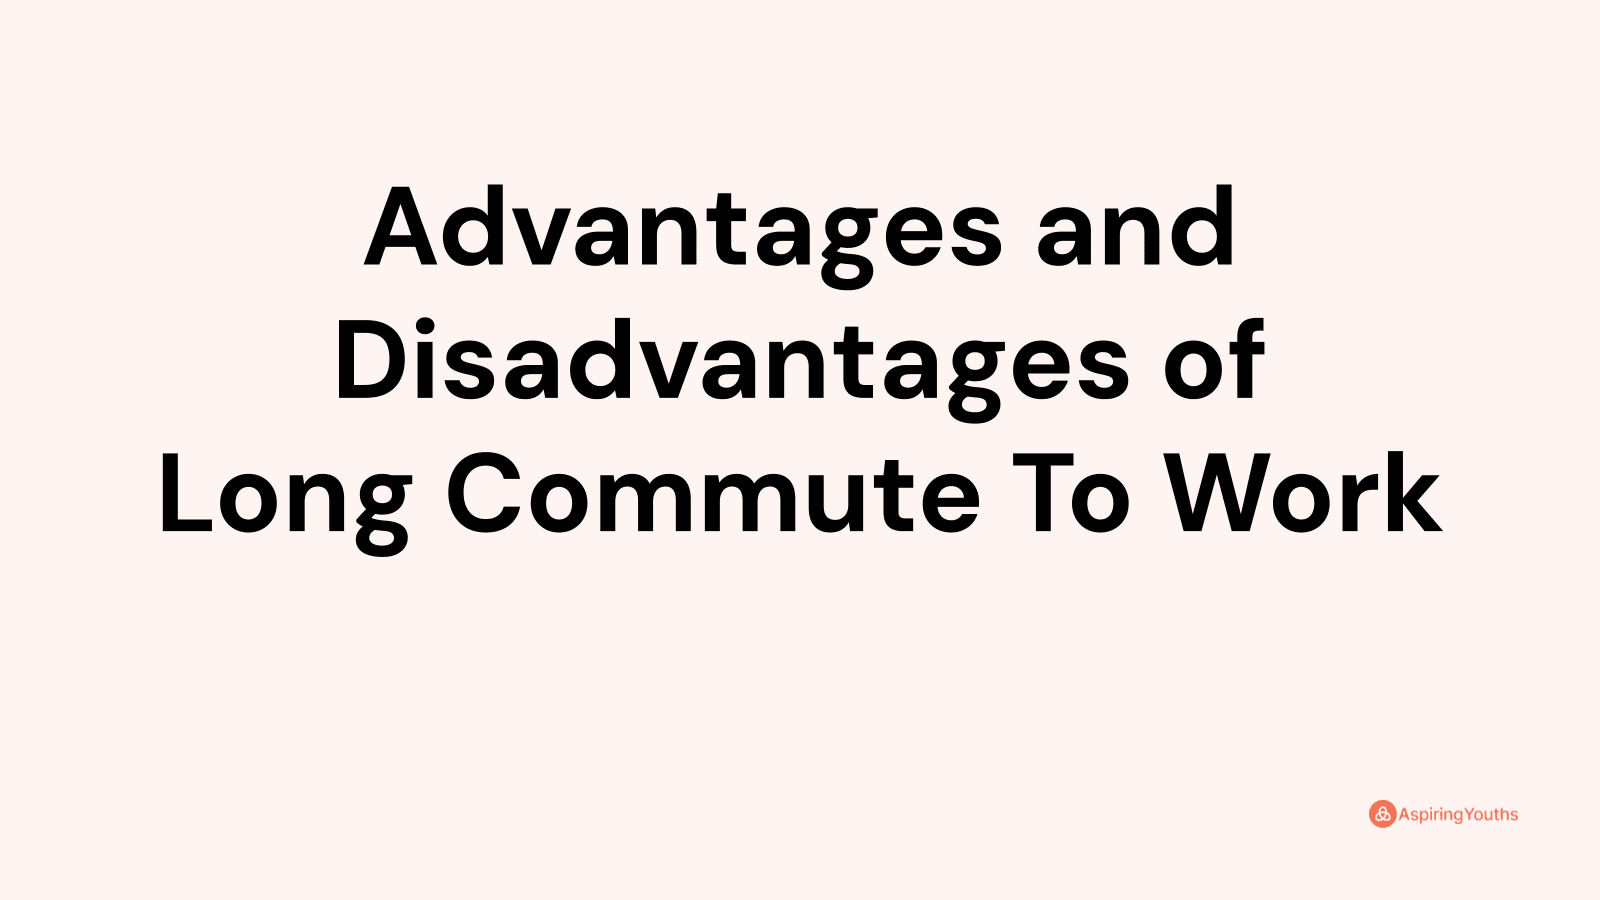 Advantages and disadvantages of Long Commute To Work